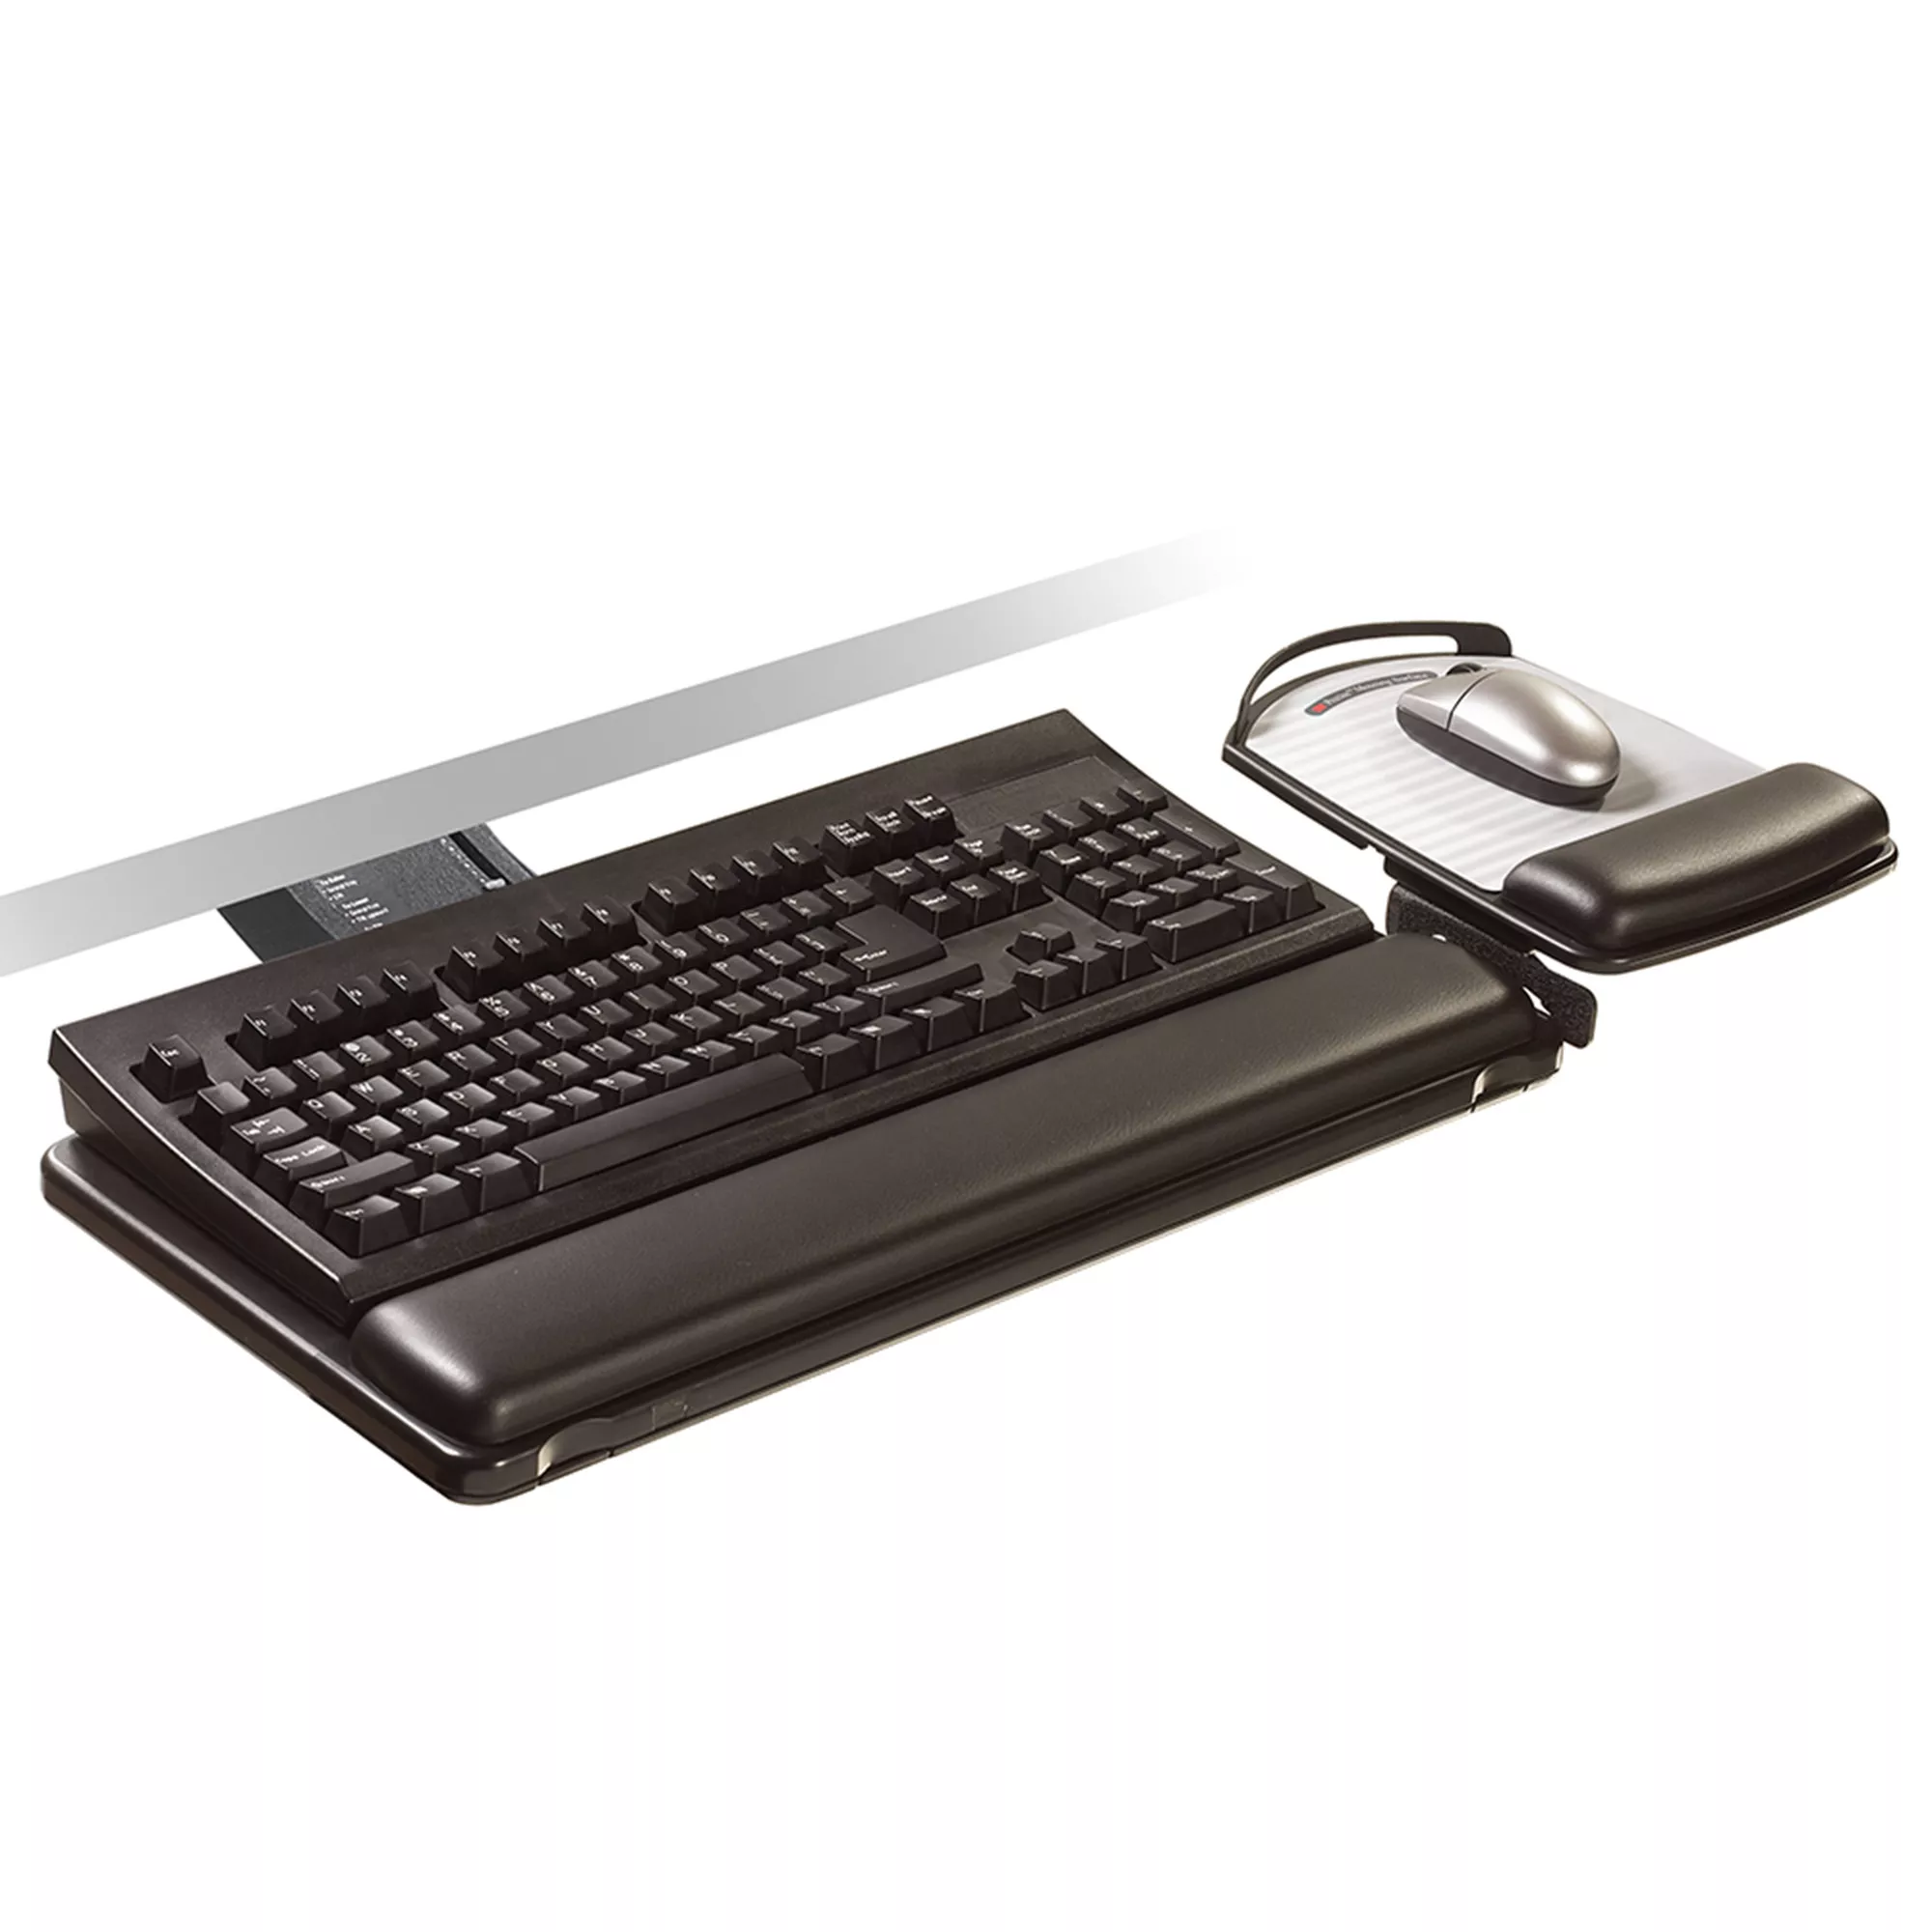 SKU 7100156036 | 3M™ Sit/Stand Easy Adjust Keyboard Tray with Adjustable Keyboard and
Mouse Platform